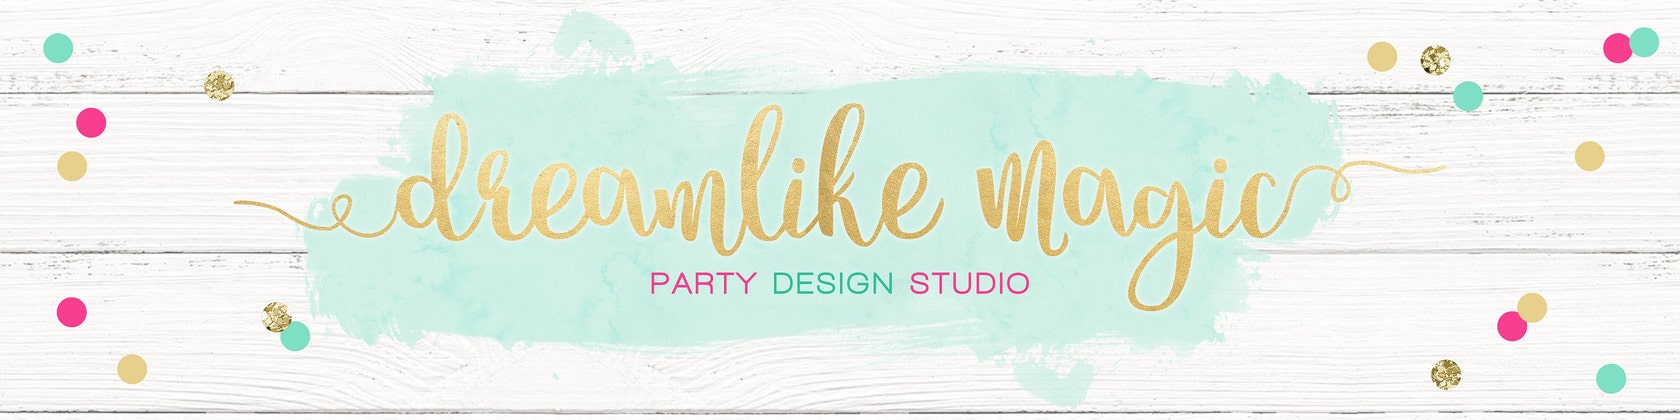 Digital & Printed Party Invitations Party Decor by DreamlikeMagic